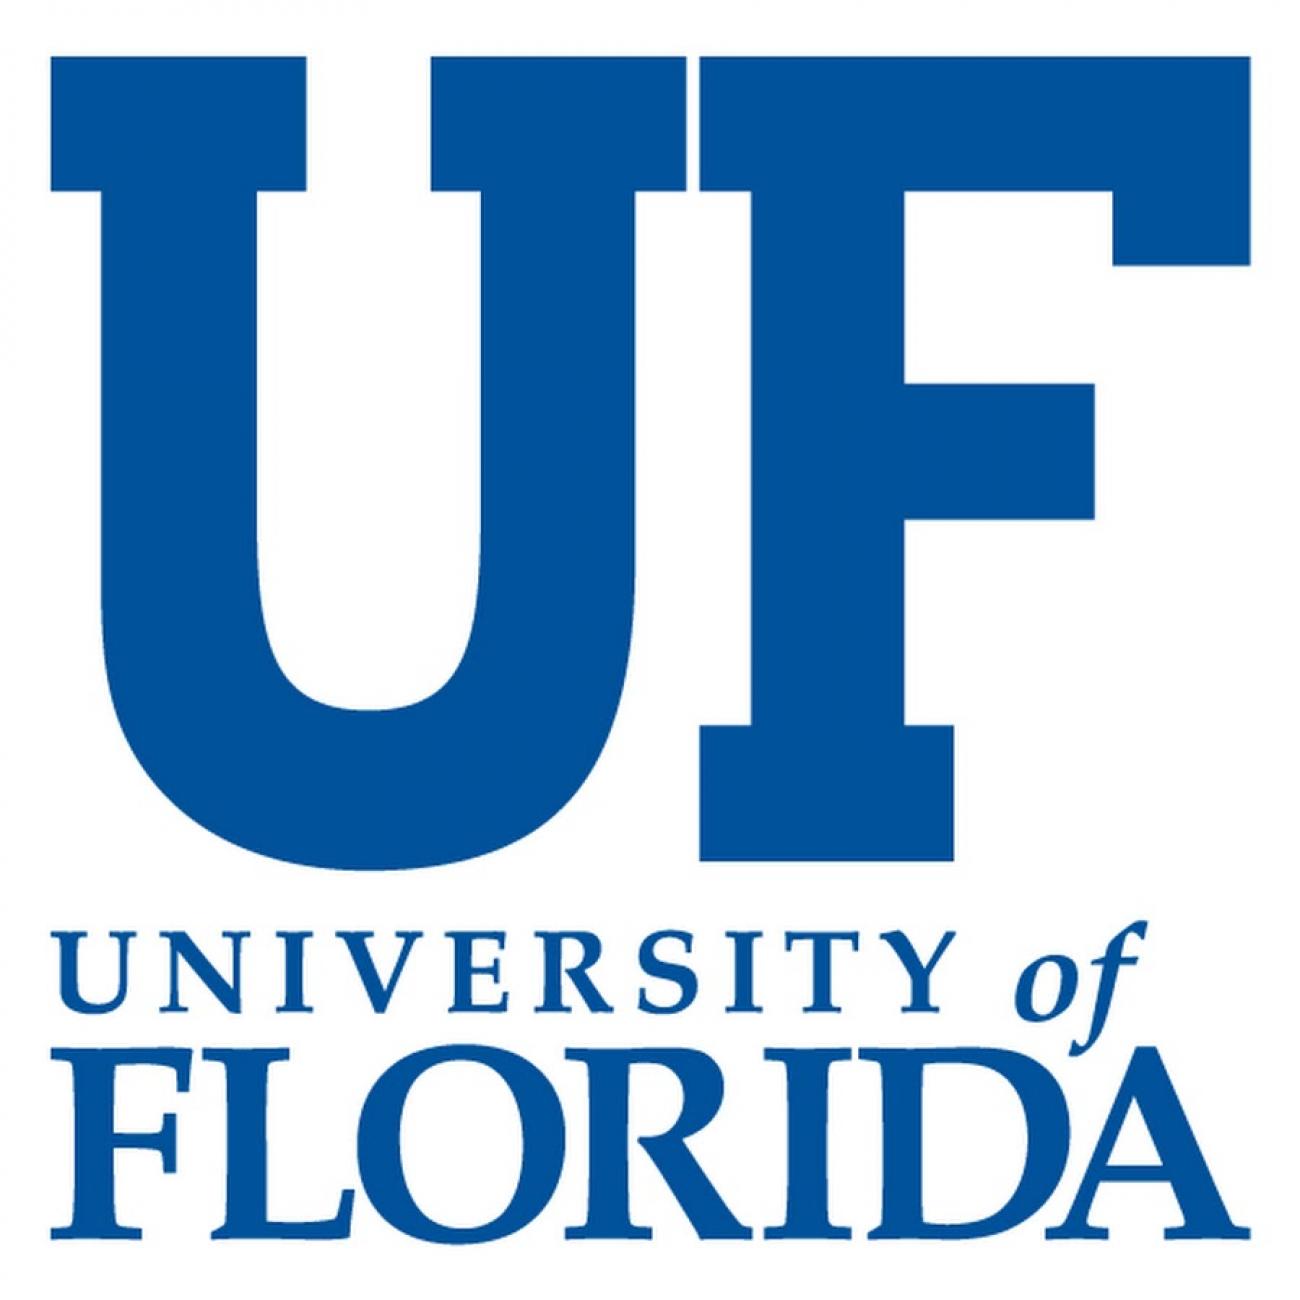 Department of Health Services Research, Management and Policy, University of Florida, Gainesville, FL